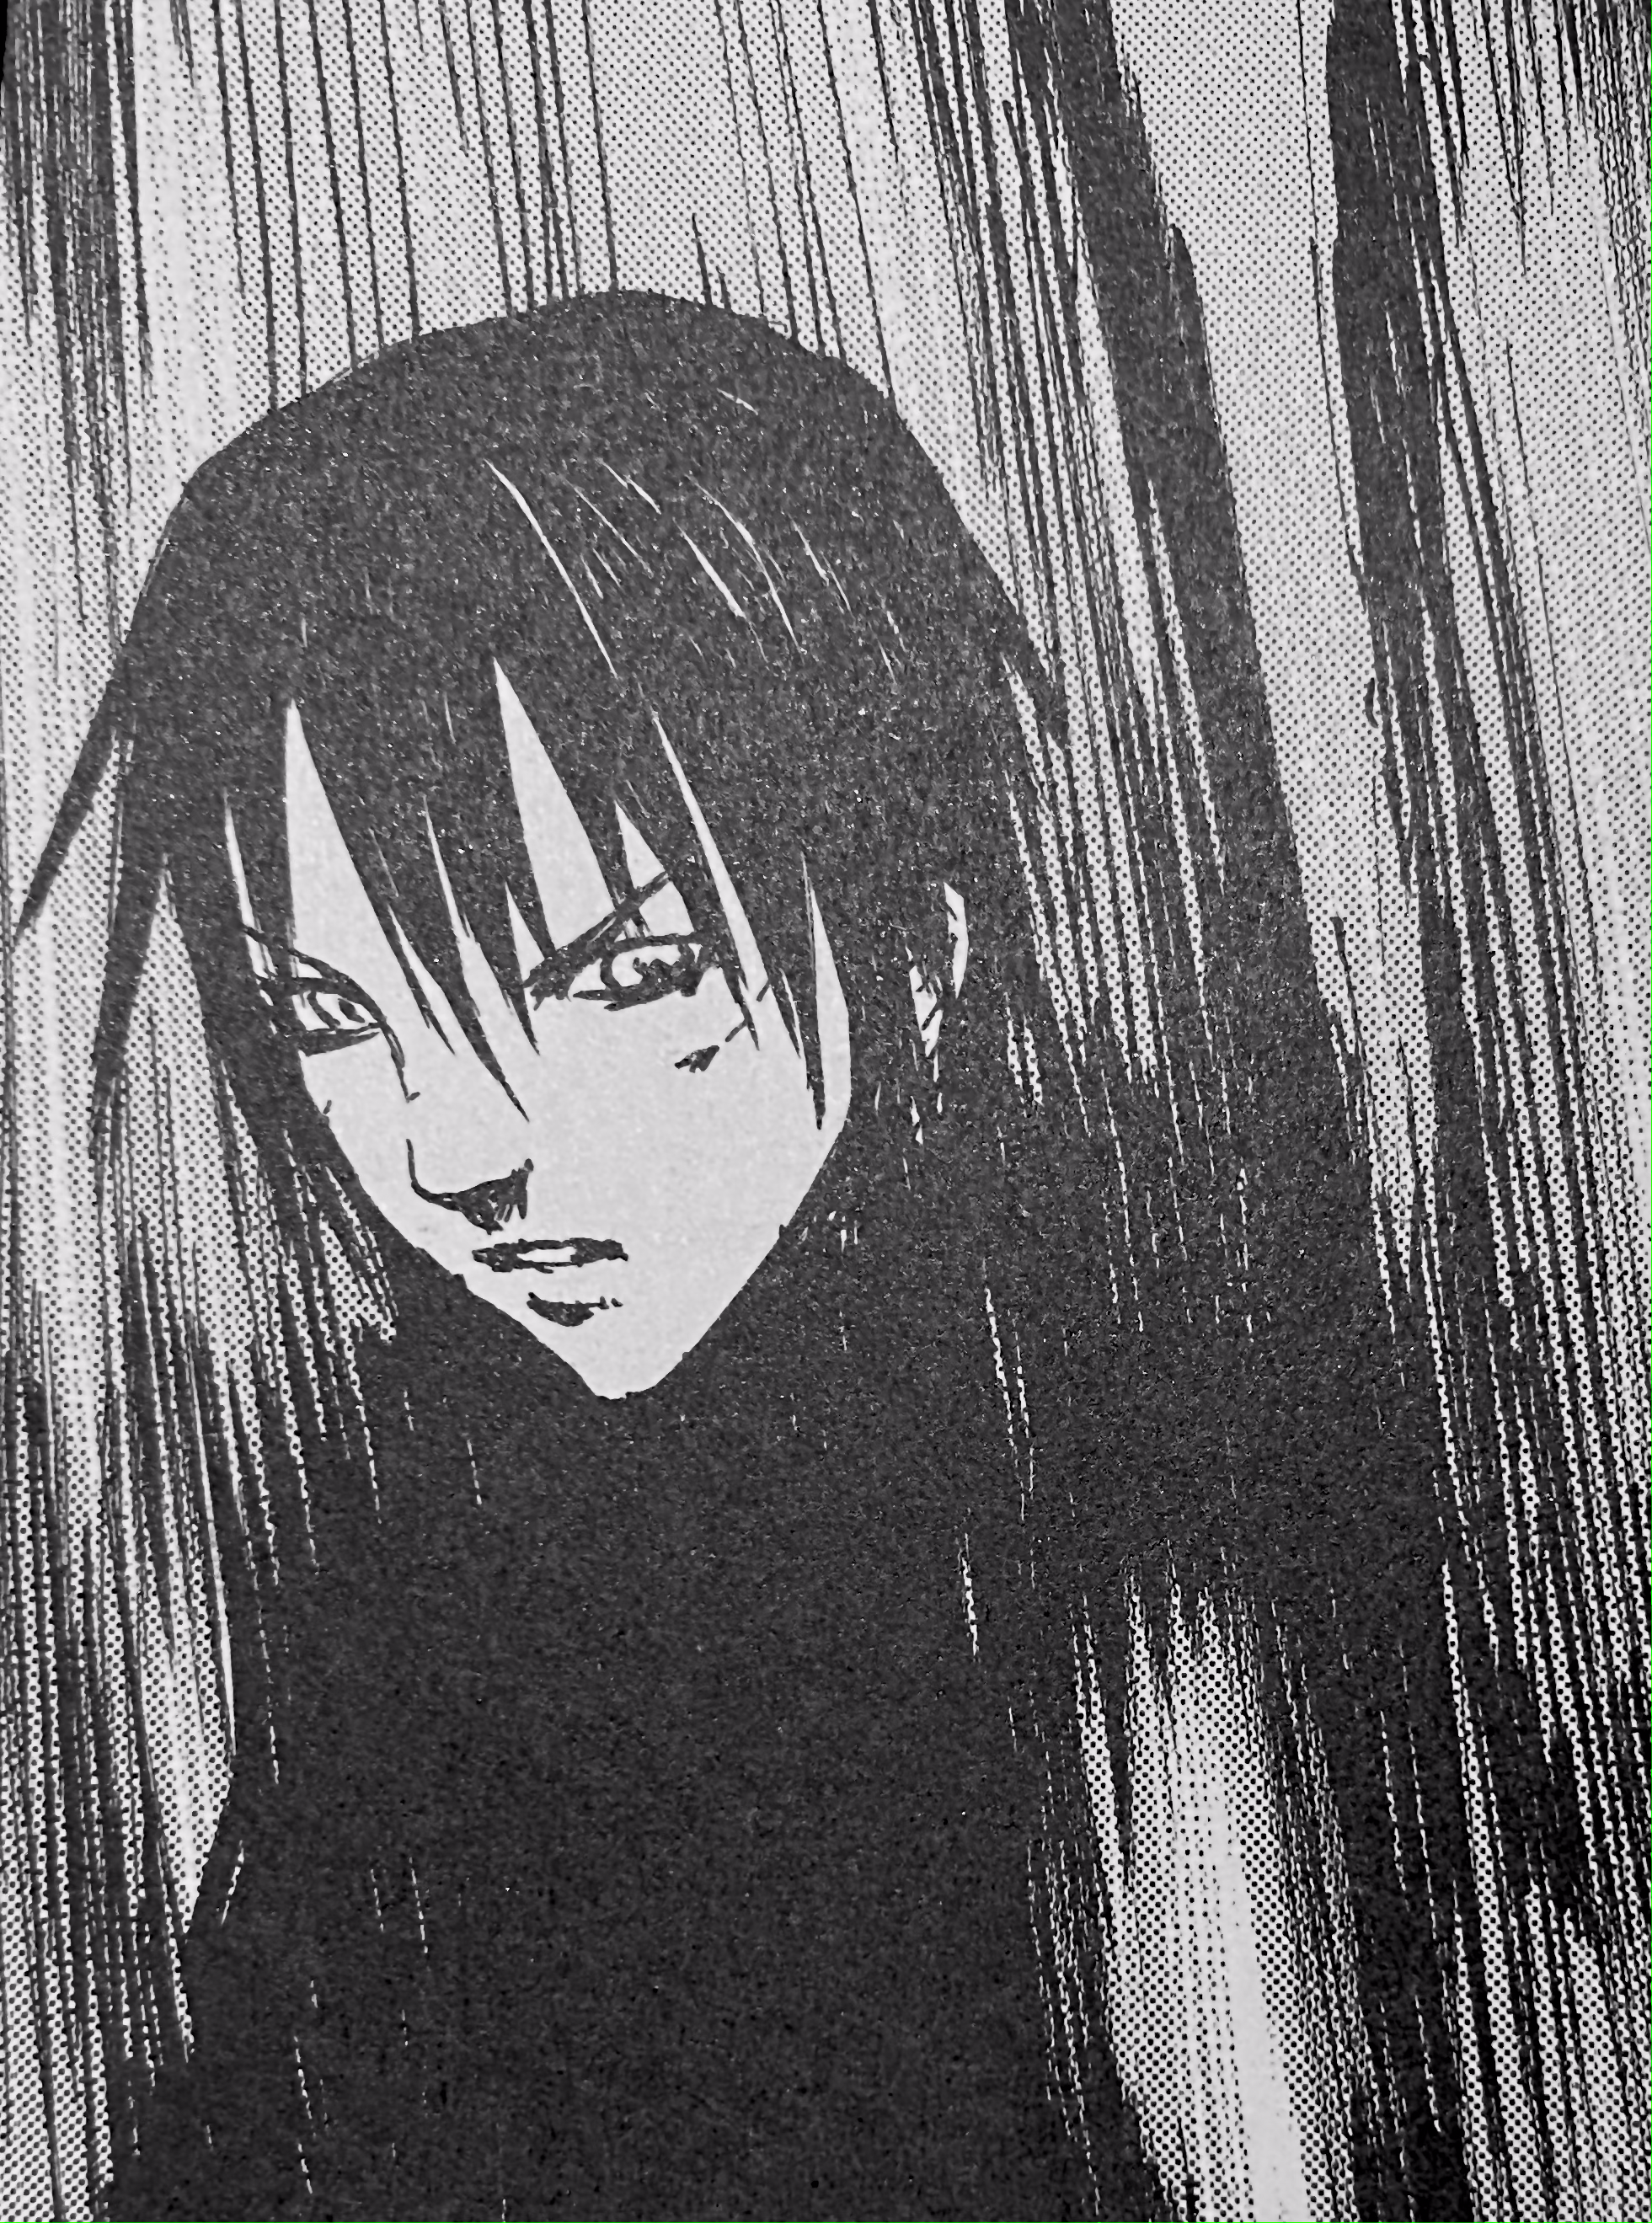 i really like the way forwarding looks in blame! the motion of the lines is so cool <br><br> [image id: a panel from blame! of kyrii being forwarded by mensab. he is surrounded by blured lines from the forwarding, and appears concerned. there are lines of blood across his face. /end id]